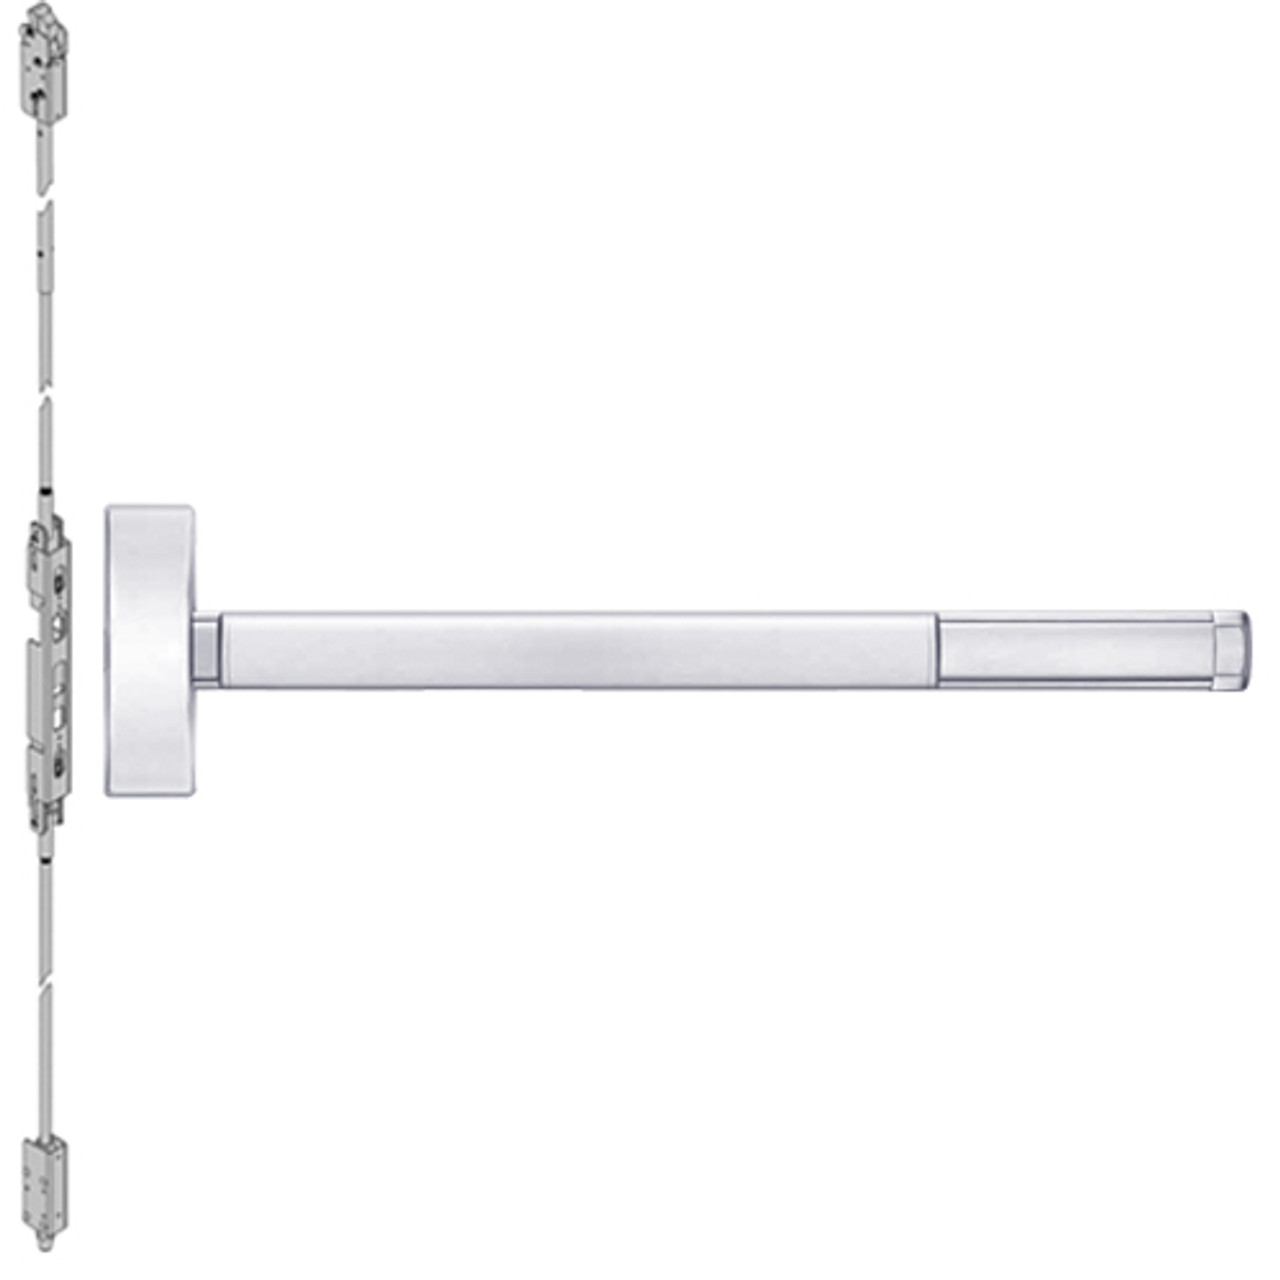 2803CD-625-36 PHI 2800 Series Non Fire Rated Concealed Vertical Rod Exit Device Prepped for Key Retracts Latchbolt in Bright Chrome Finish